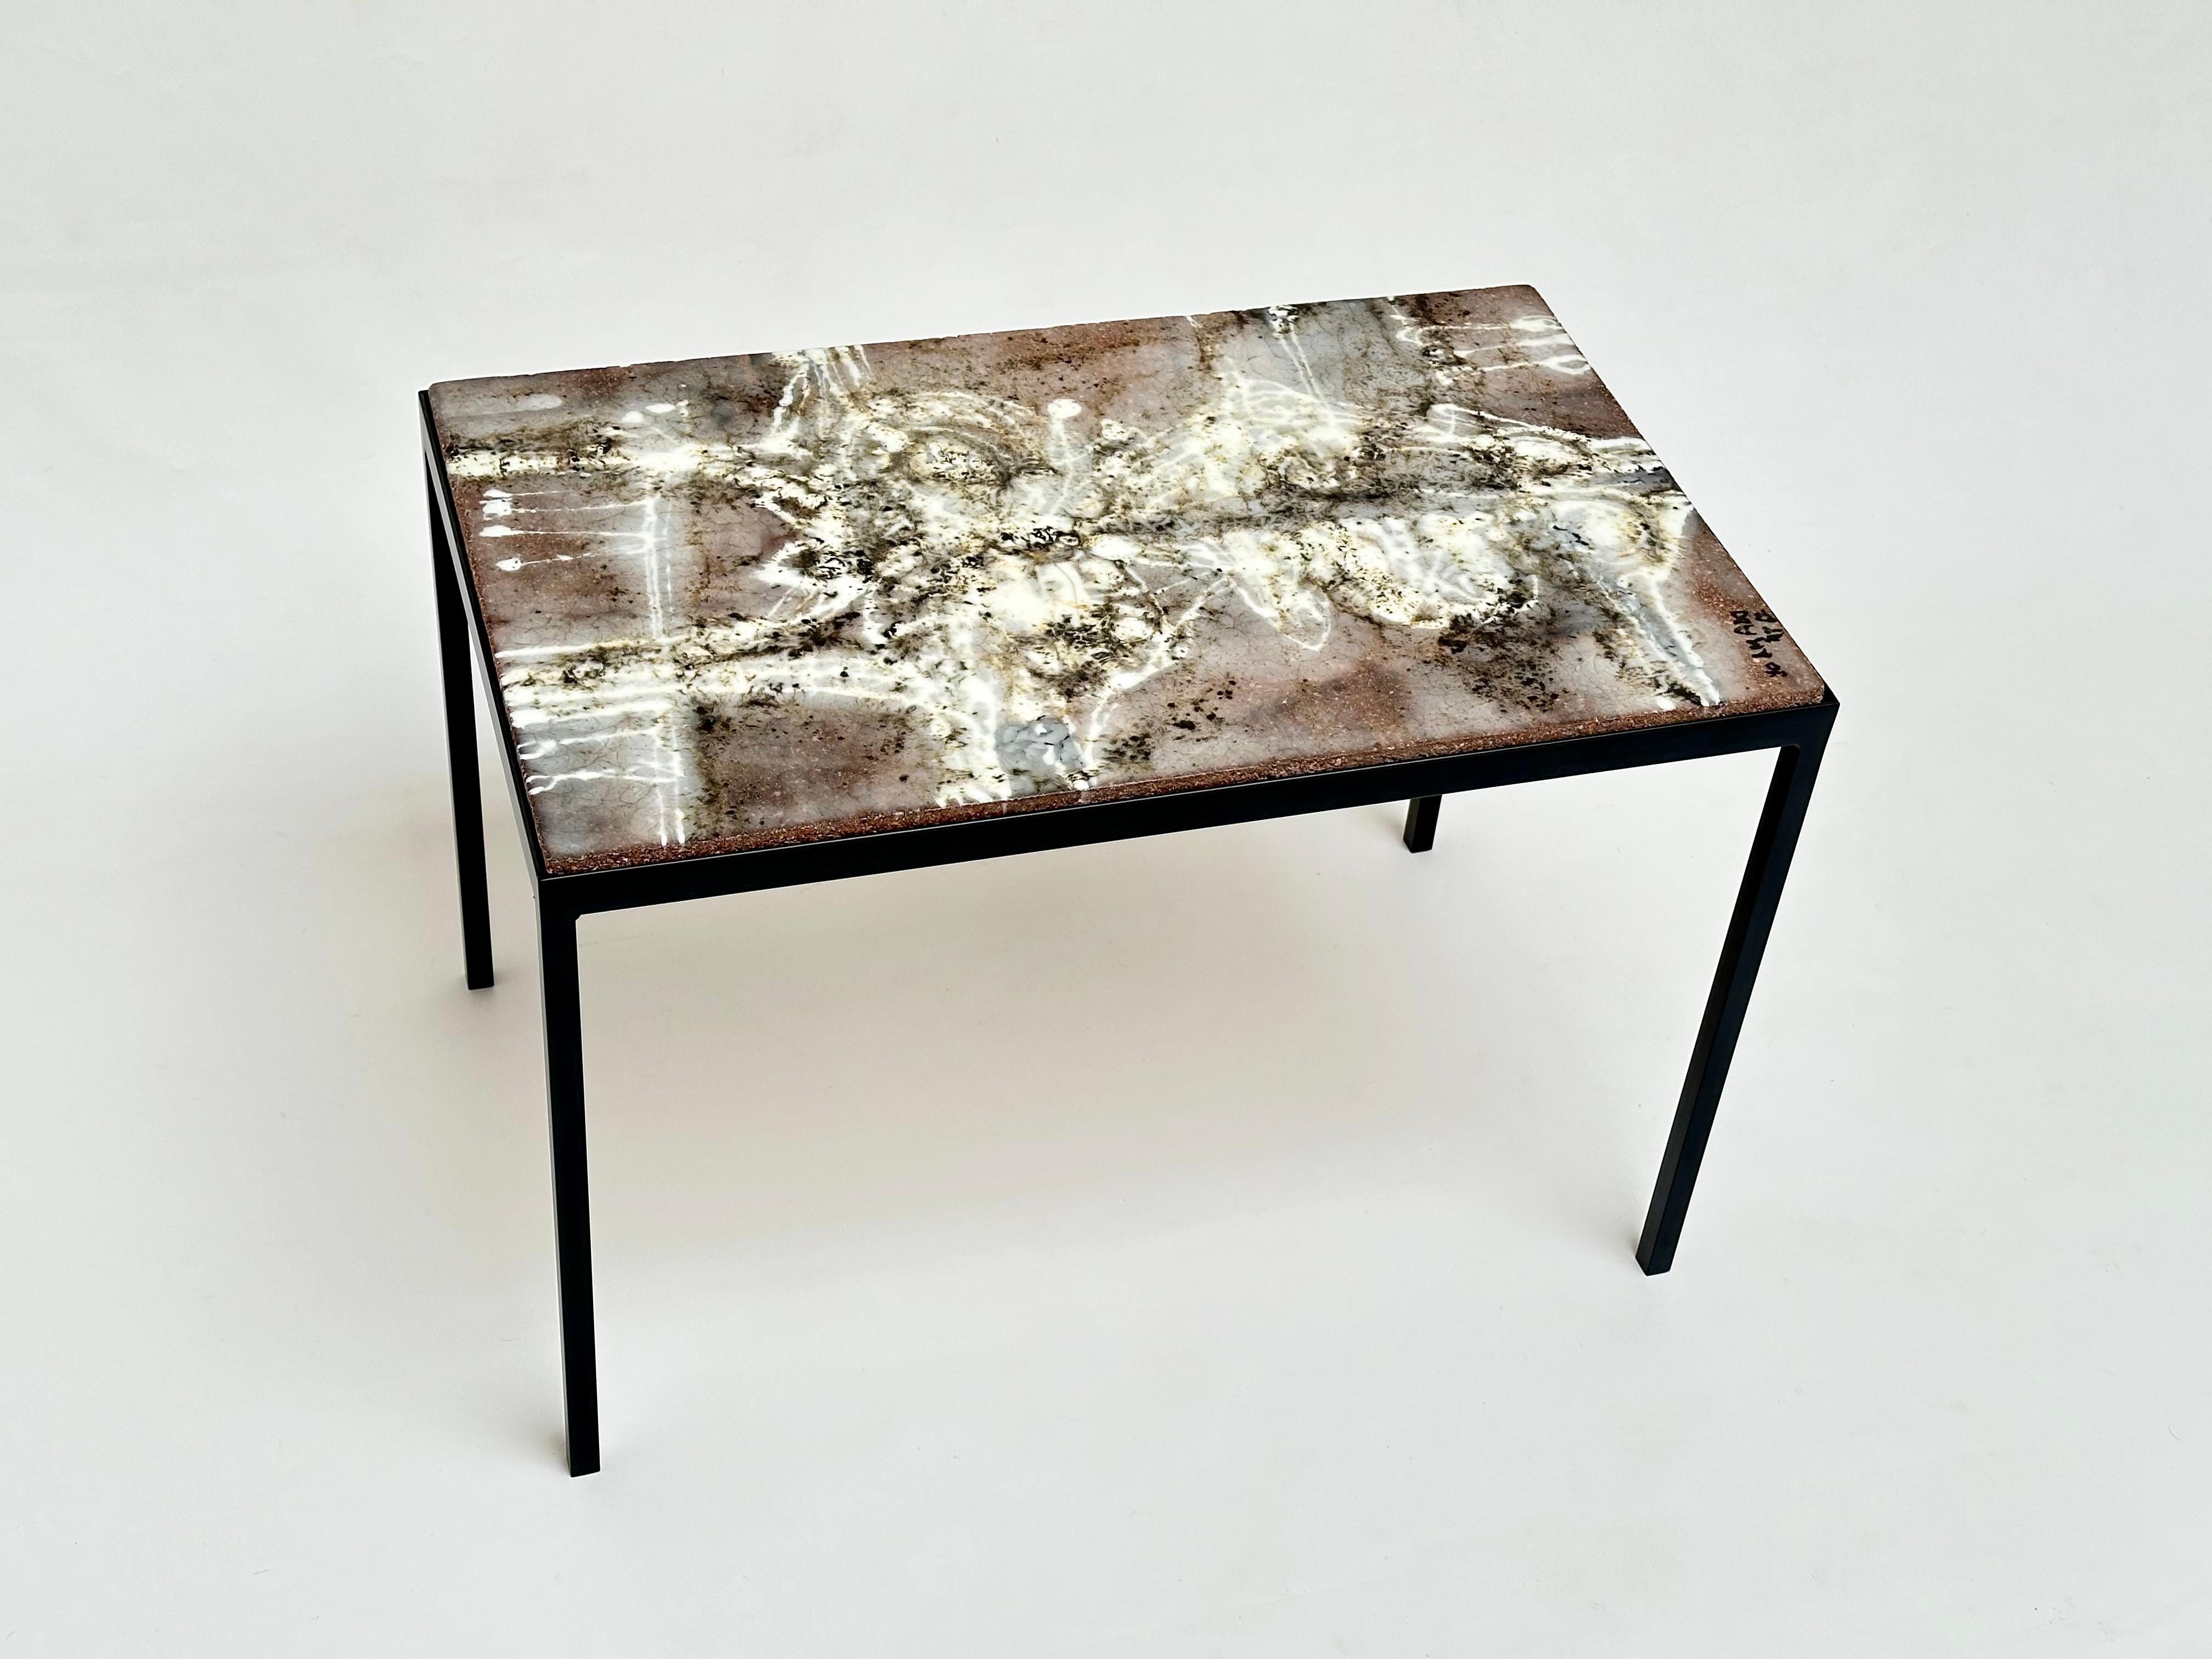 Decorative Low Table, Jo Amado, France 1962 For Sale 3